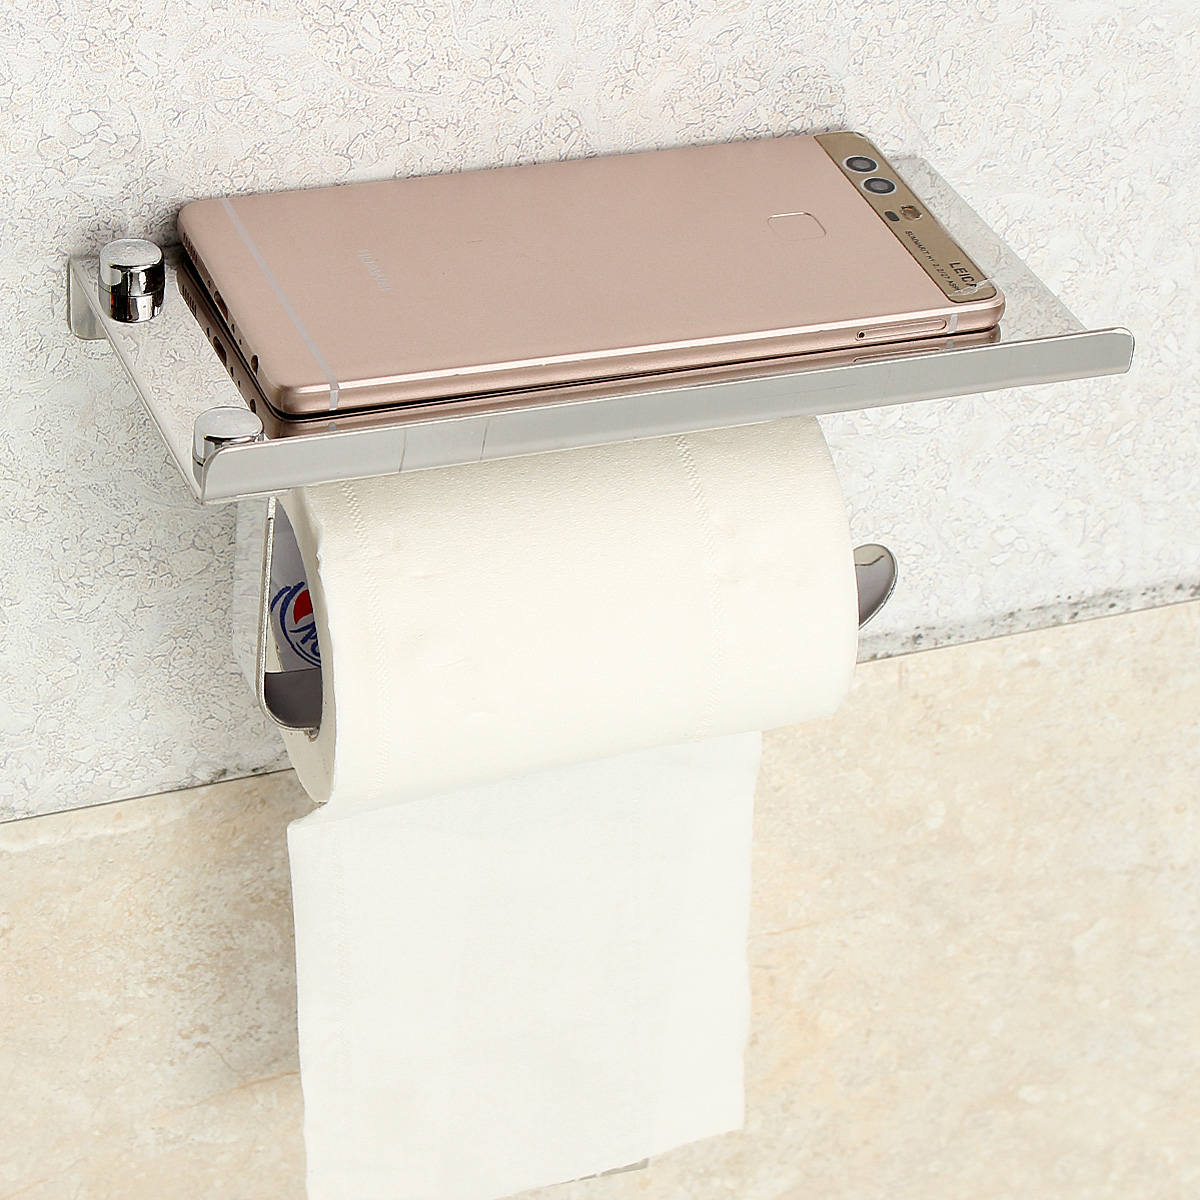 Stainless-Steel-Toilet-Roll-Tissue-Stand-Paper-Holder-Wall-Mounted-for-Home-Bathroom-Paper-Hook-1256427-7